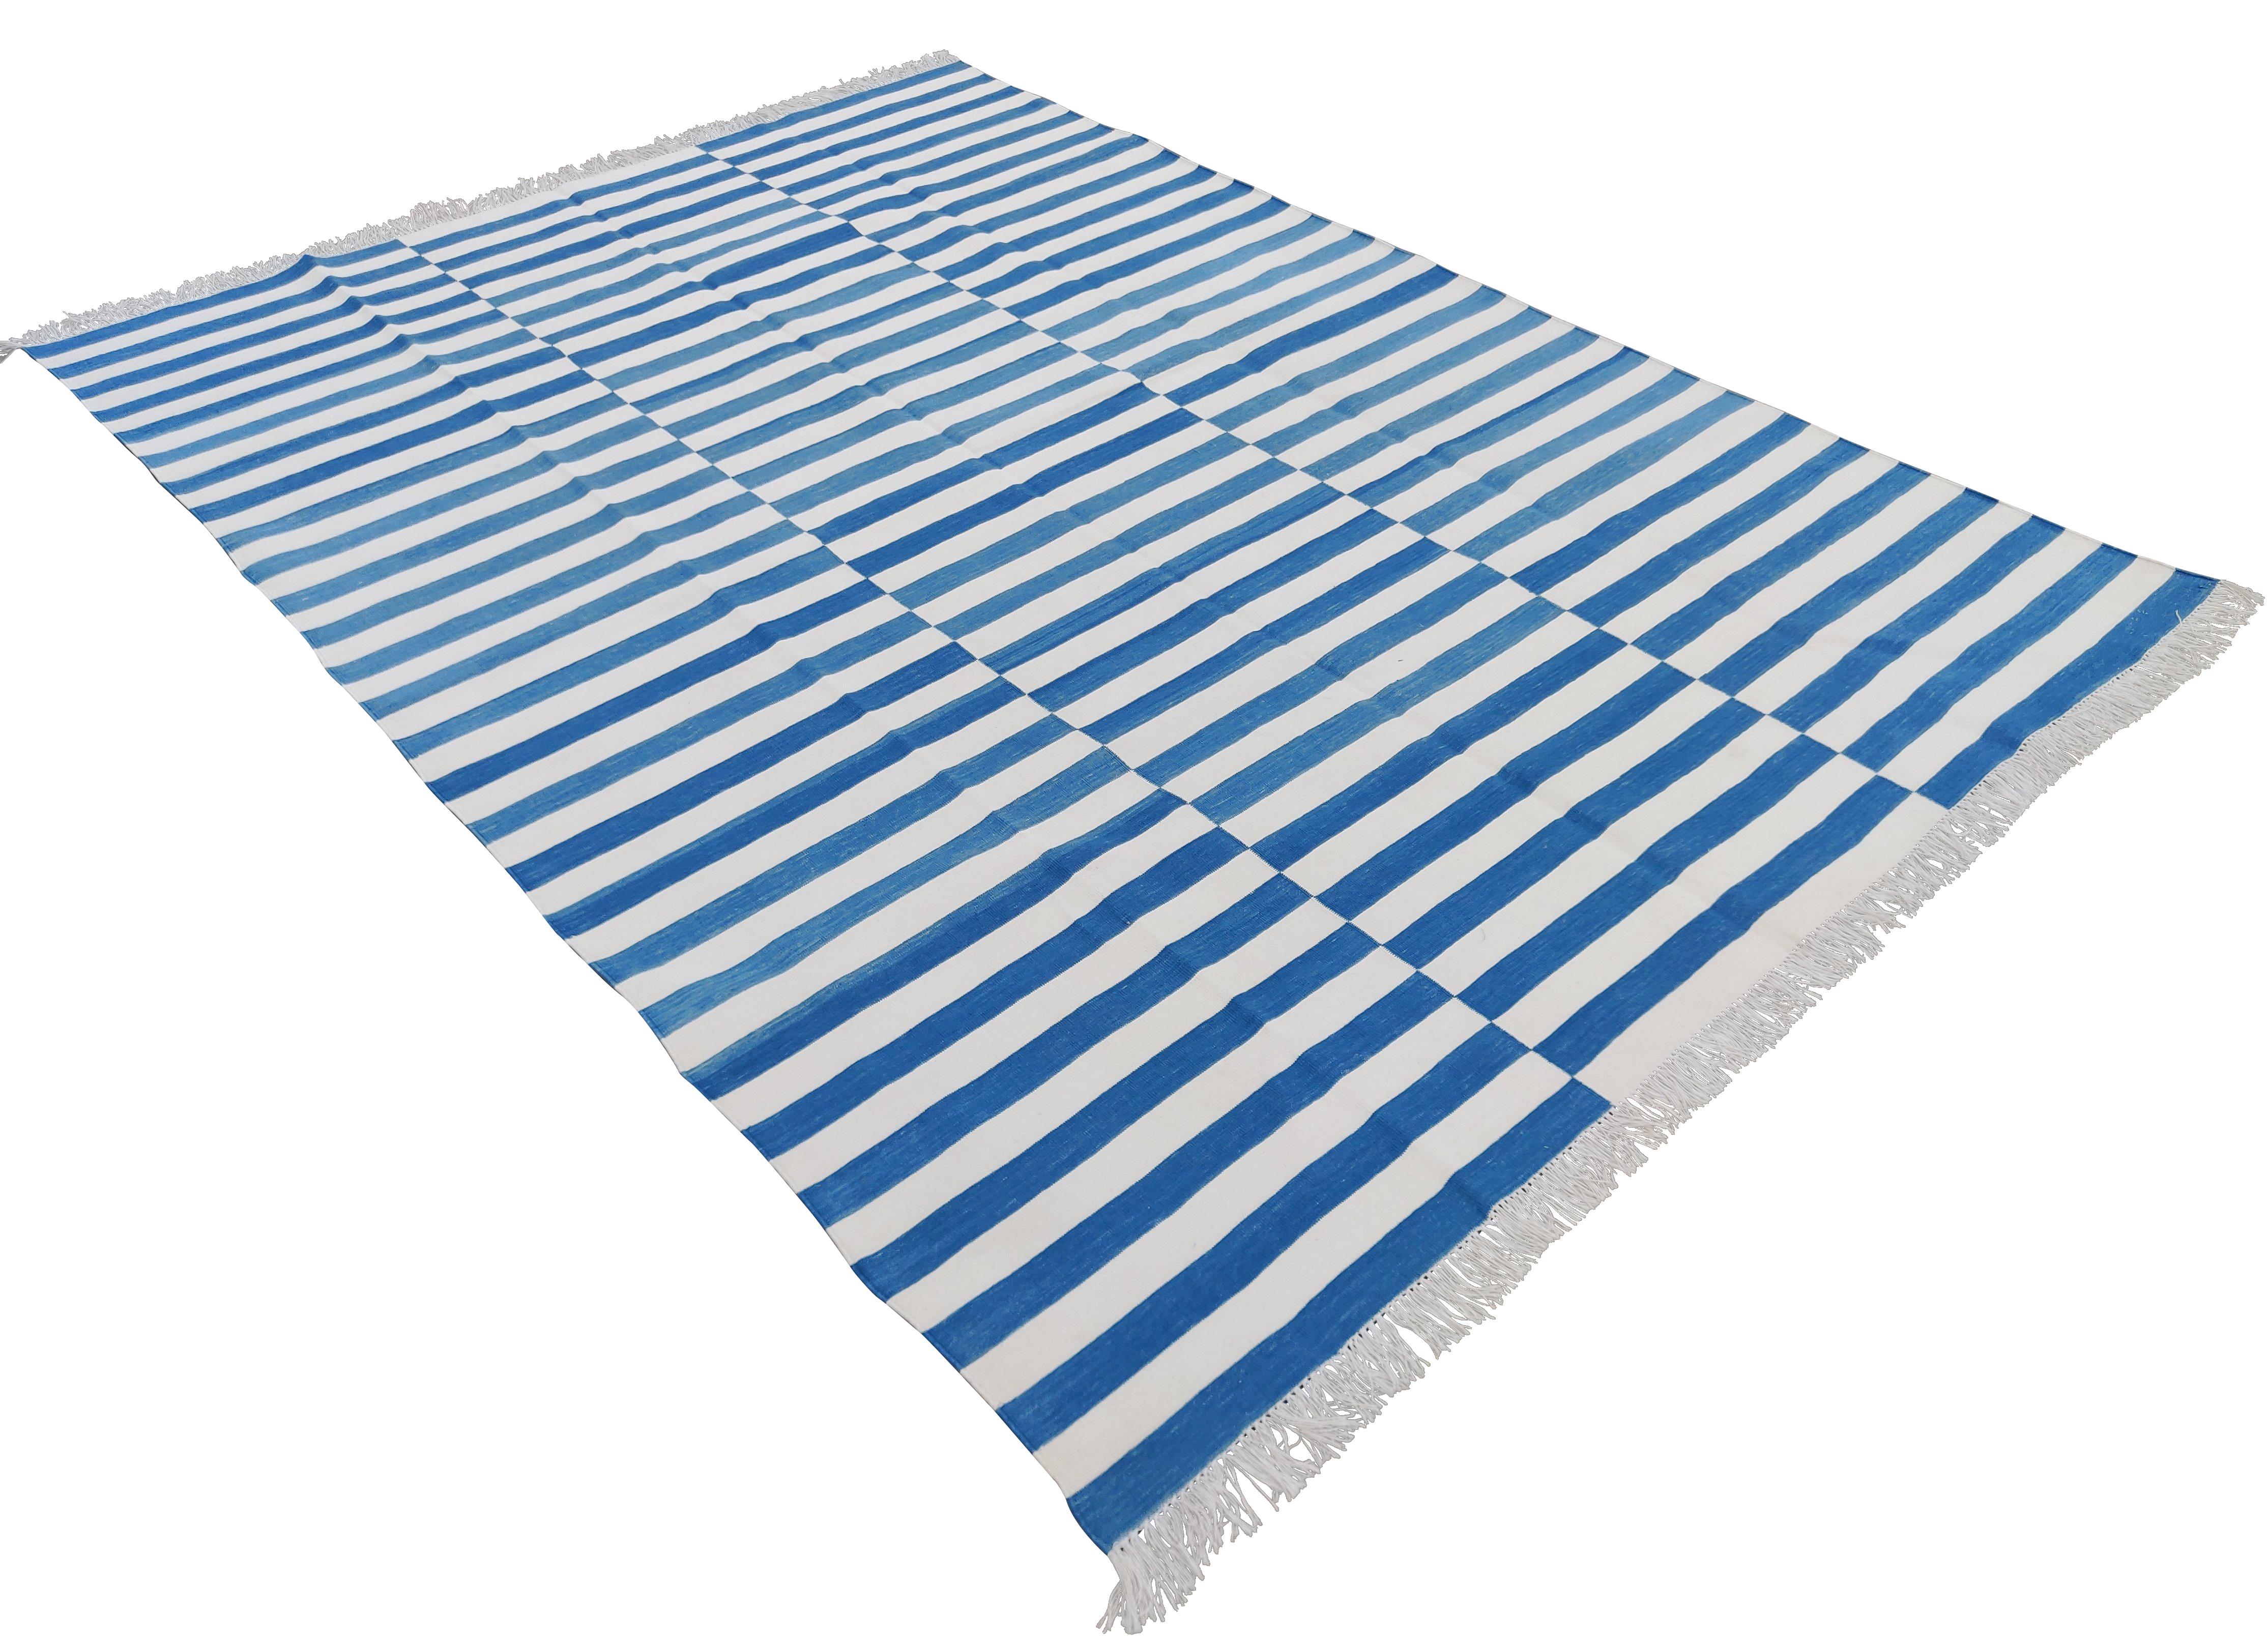 Cotton Natural Vegetable Dyed Sky Blue And White Striped Rug-8'x10'
These special flat-weave dhurries are hand-woven with 15 ply 100% cotton yarn. Due to the special manufacturing techniques used to create our rugs, the size and color of each piece